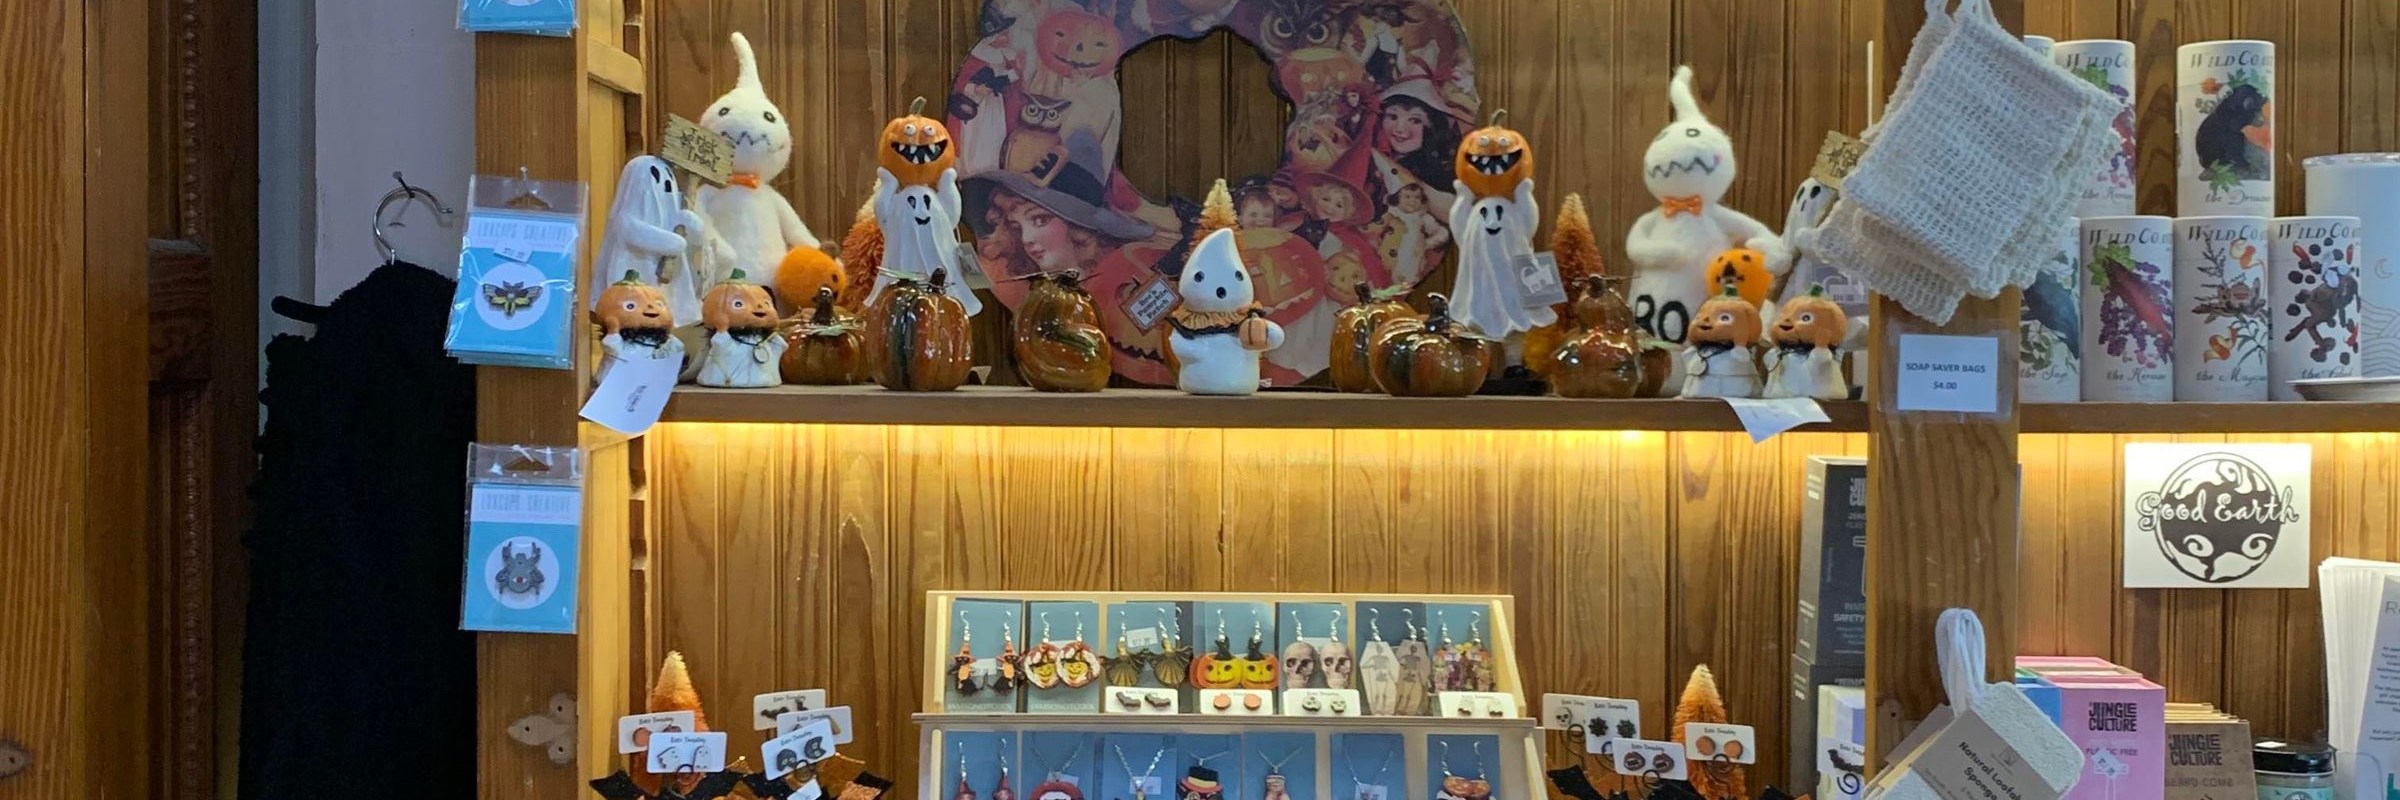 It's Halloween in the Museum Store!